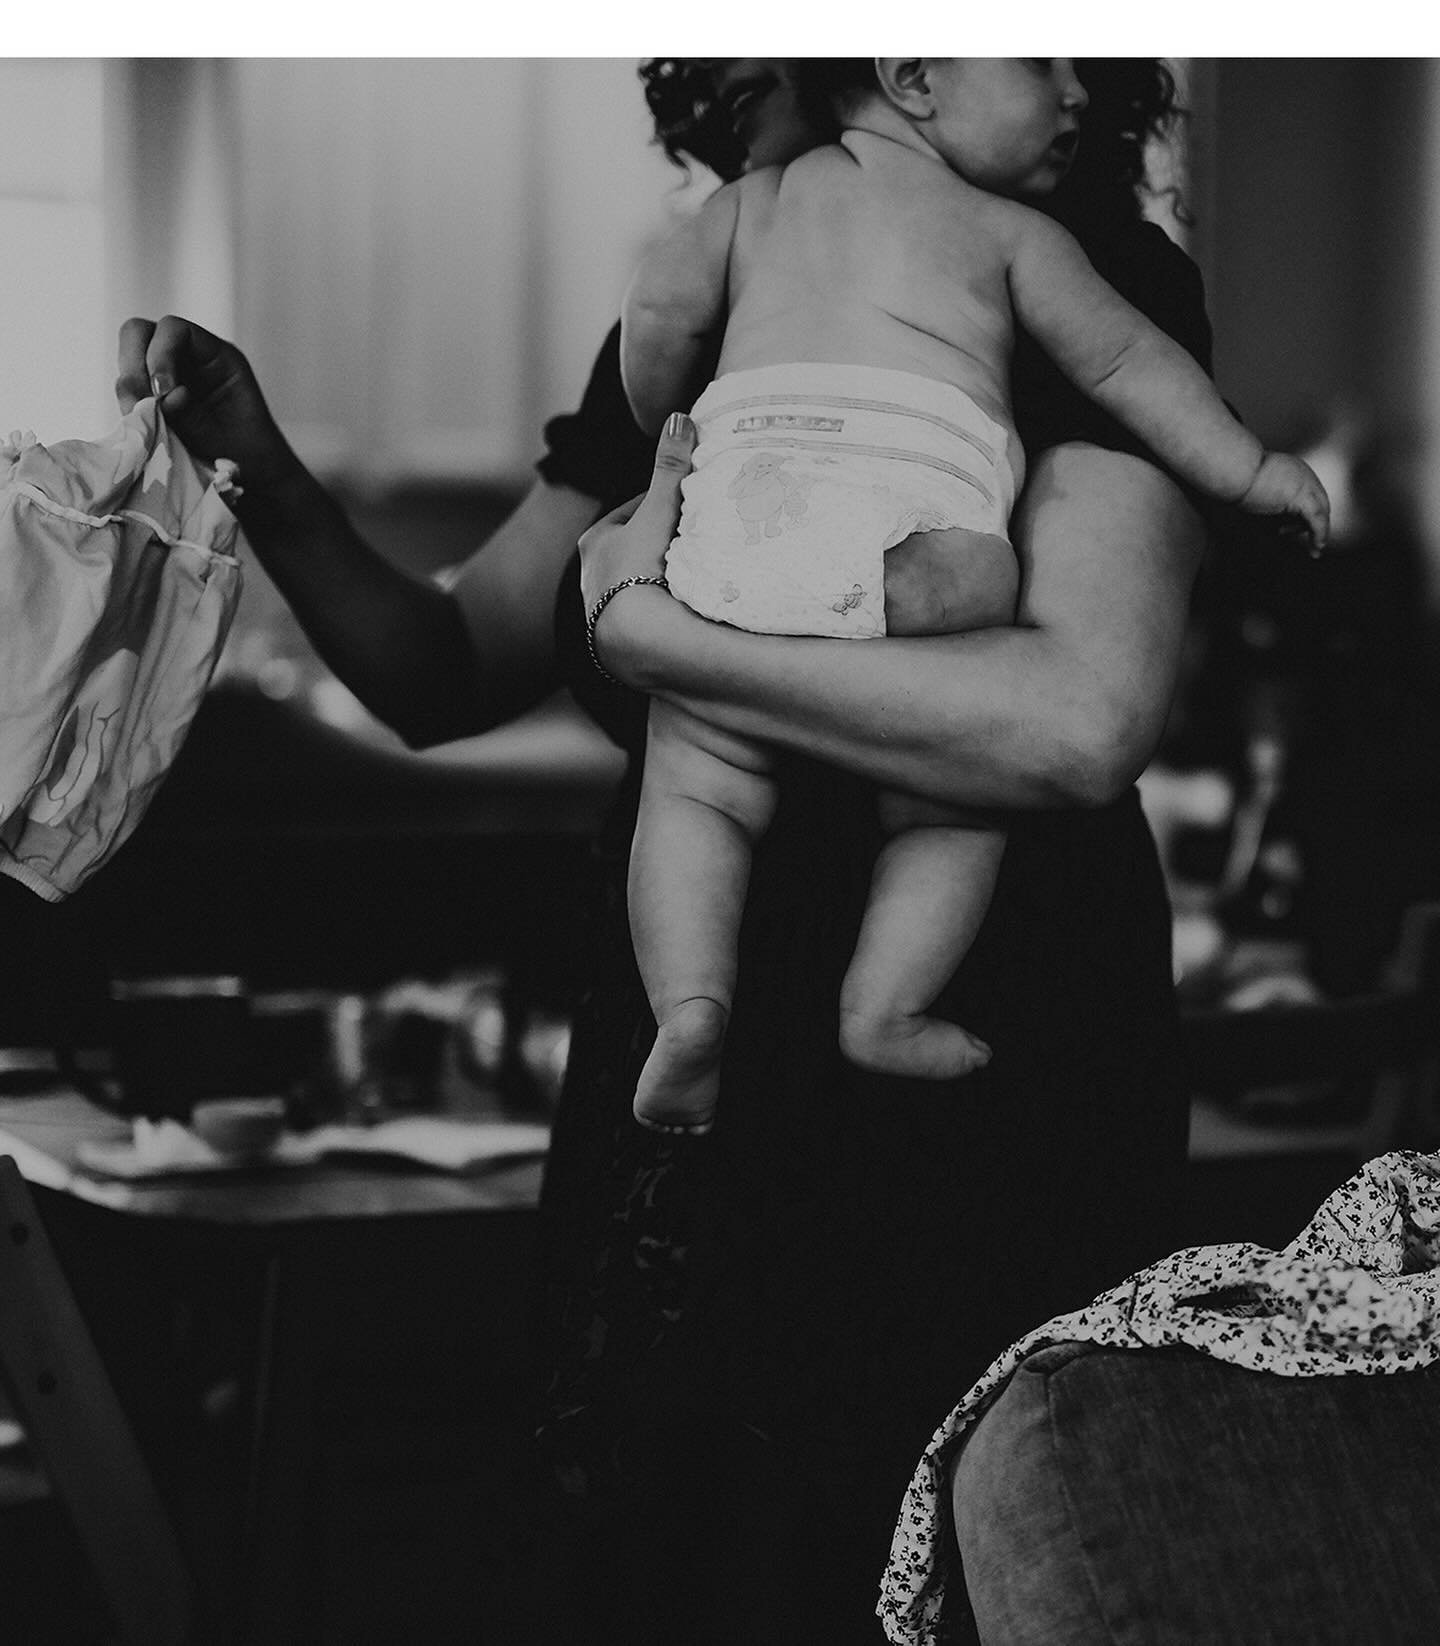 A handful of my favorite black and white&rsquo;s from a family session at home. 🖤🤍

Family photography for me, is about documenting. It&rsquo;s about capturing you and your life right now. It&rsquo;s about telling a story&hellip; Your story. 

I ha